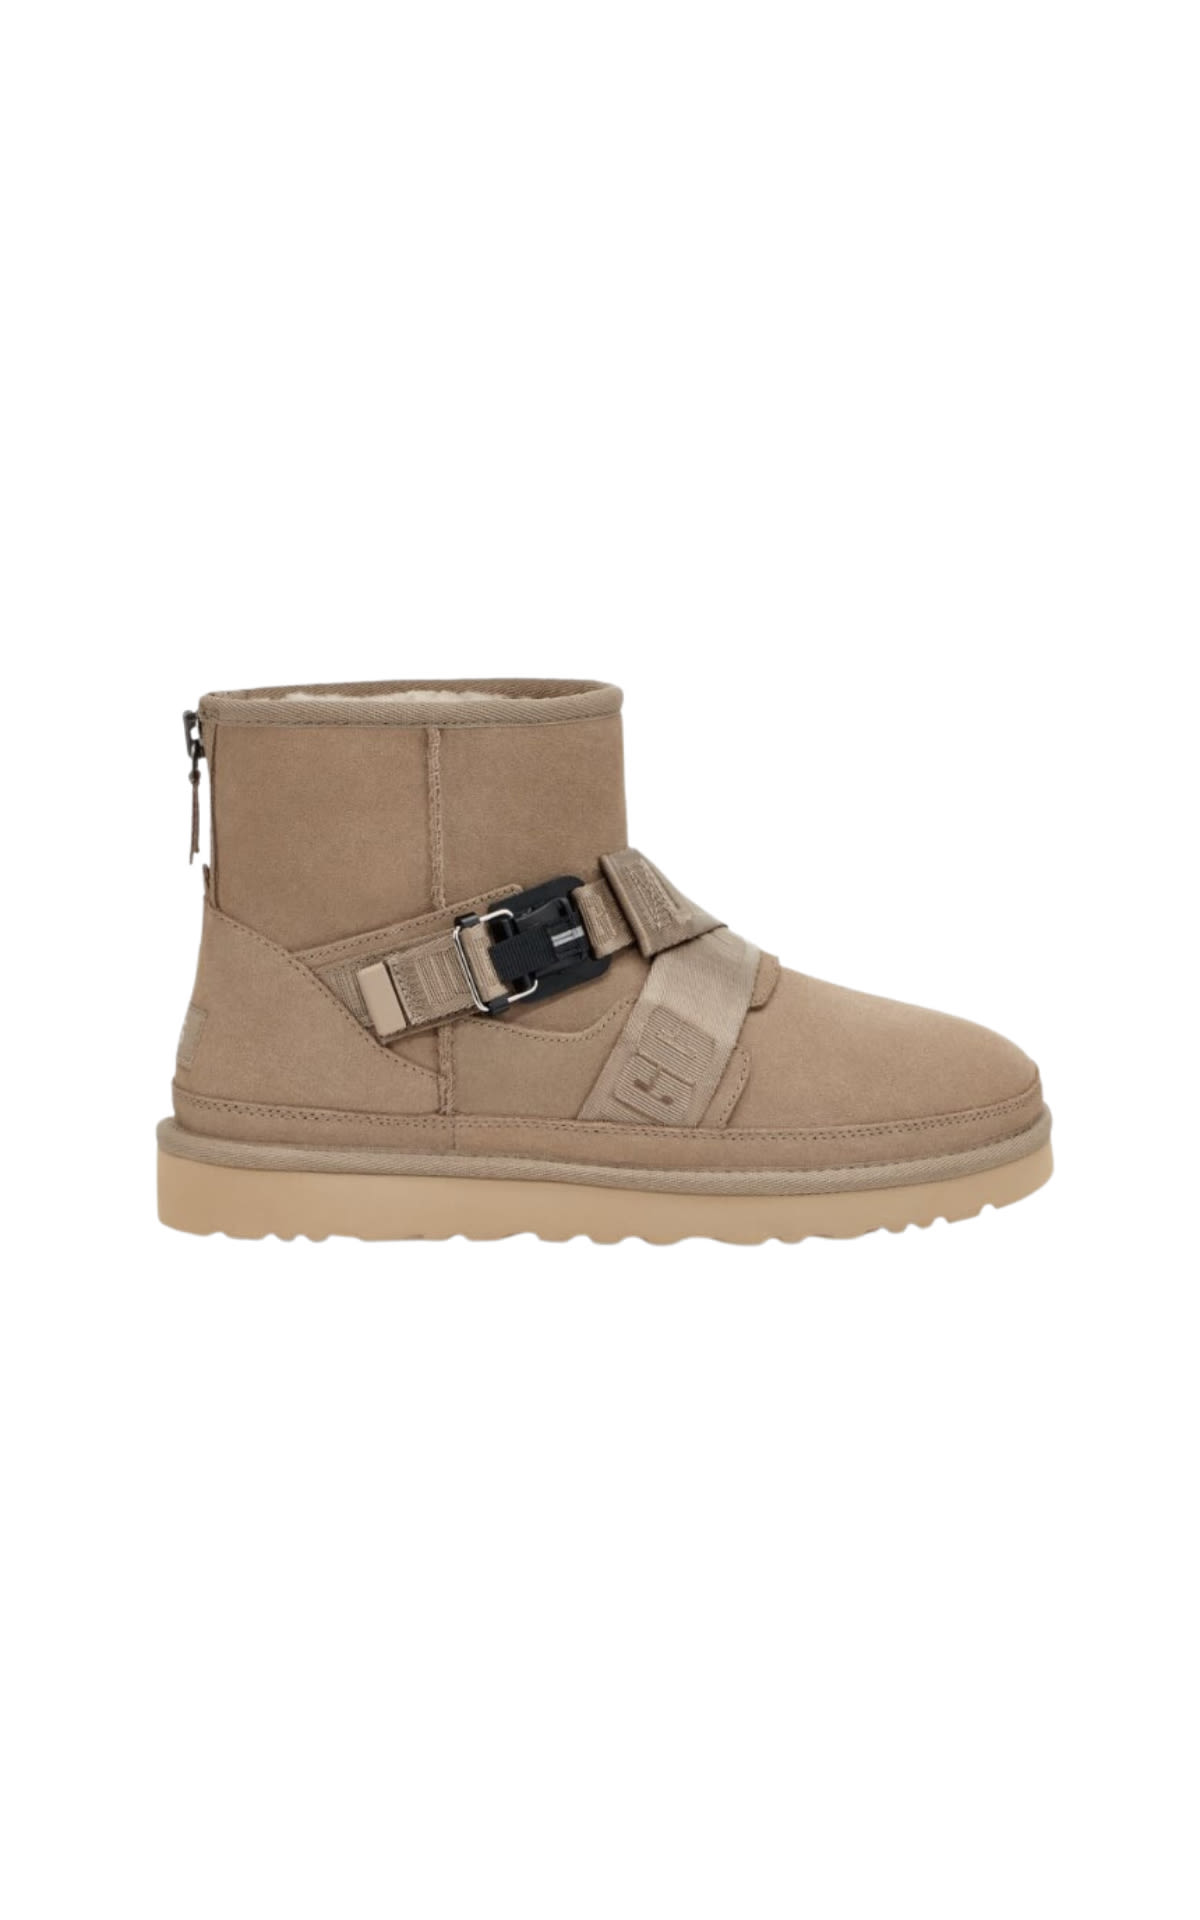 Ugg Classic quickclick boots from Bicester Village